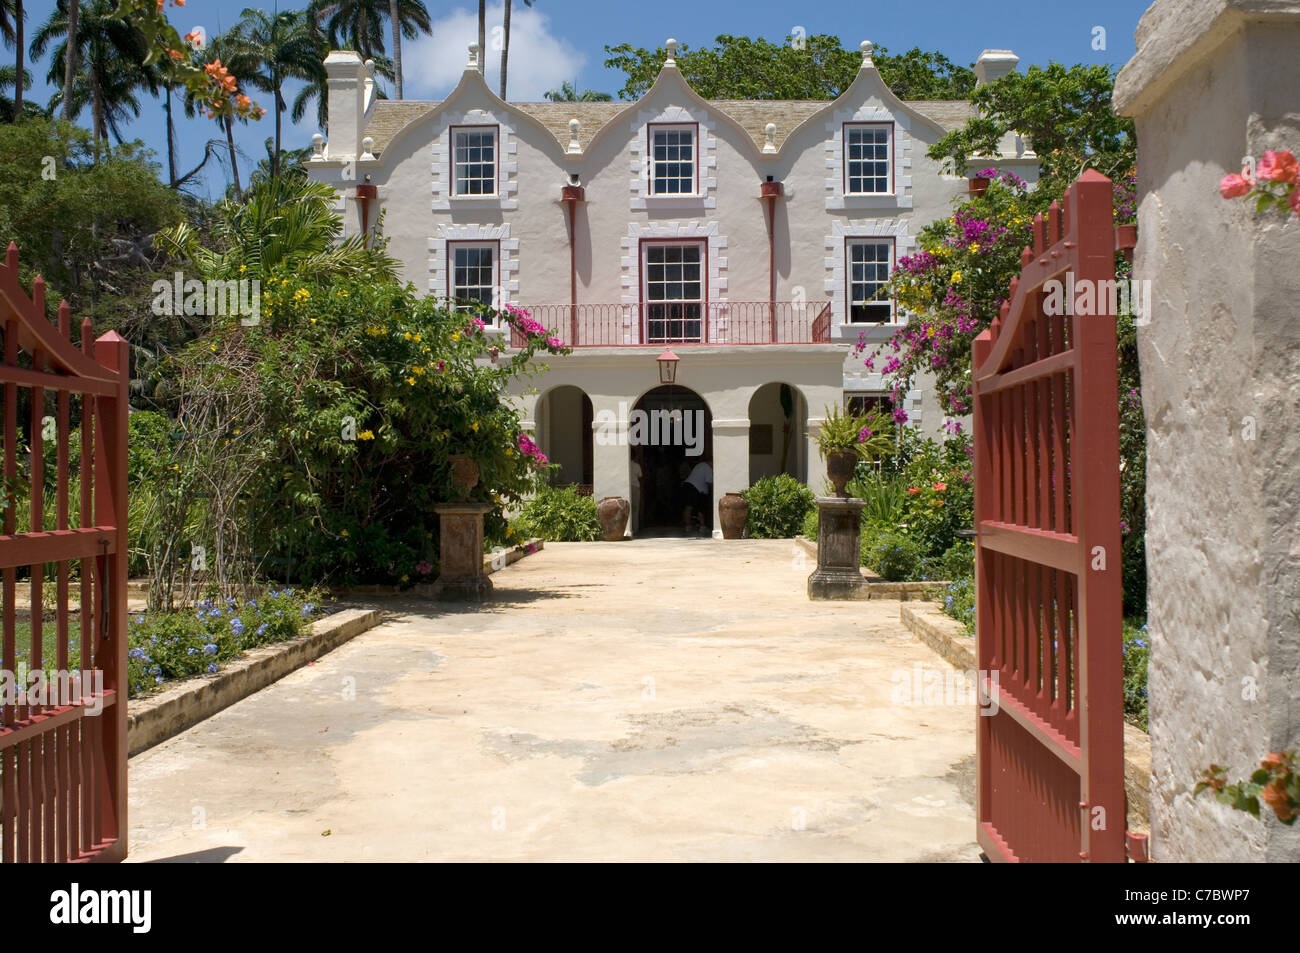 St Nicholas Abbey is a Jacobean plantation house built in the 1650s and is the oldest house in Barbados. Stock Photo